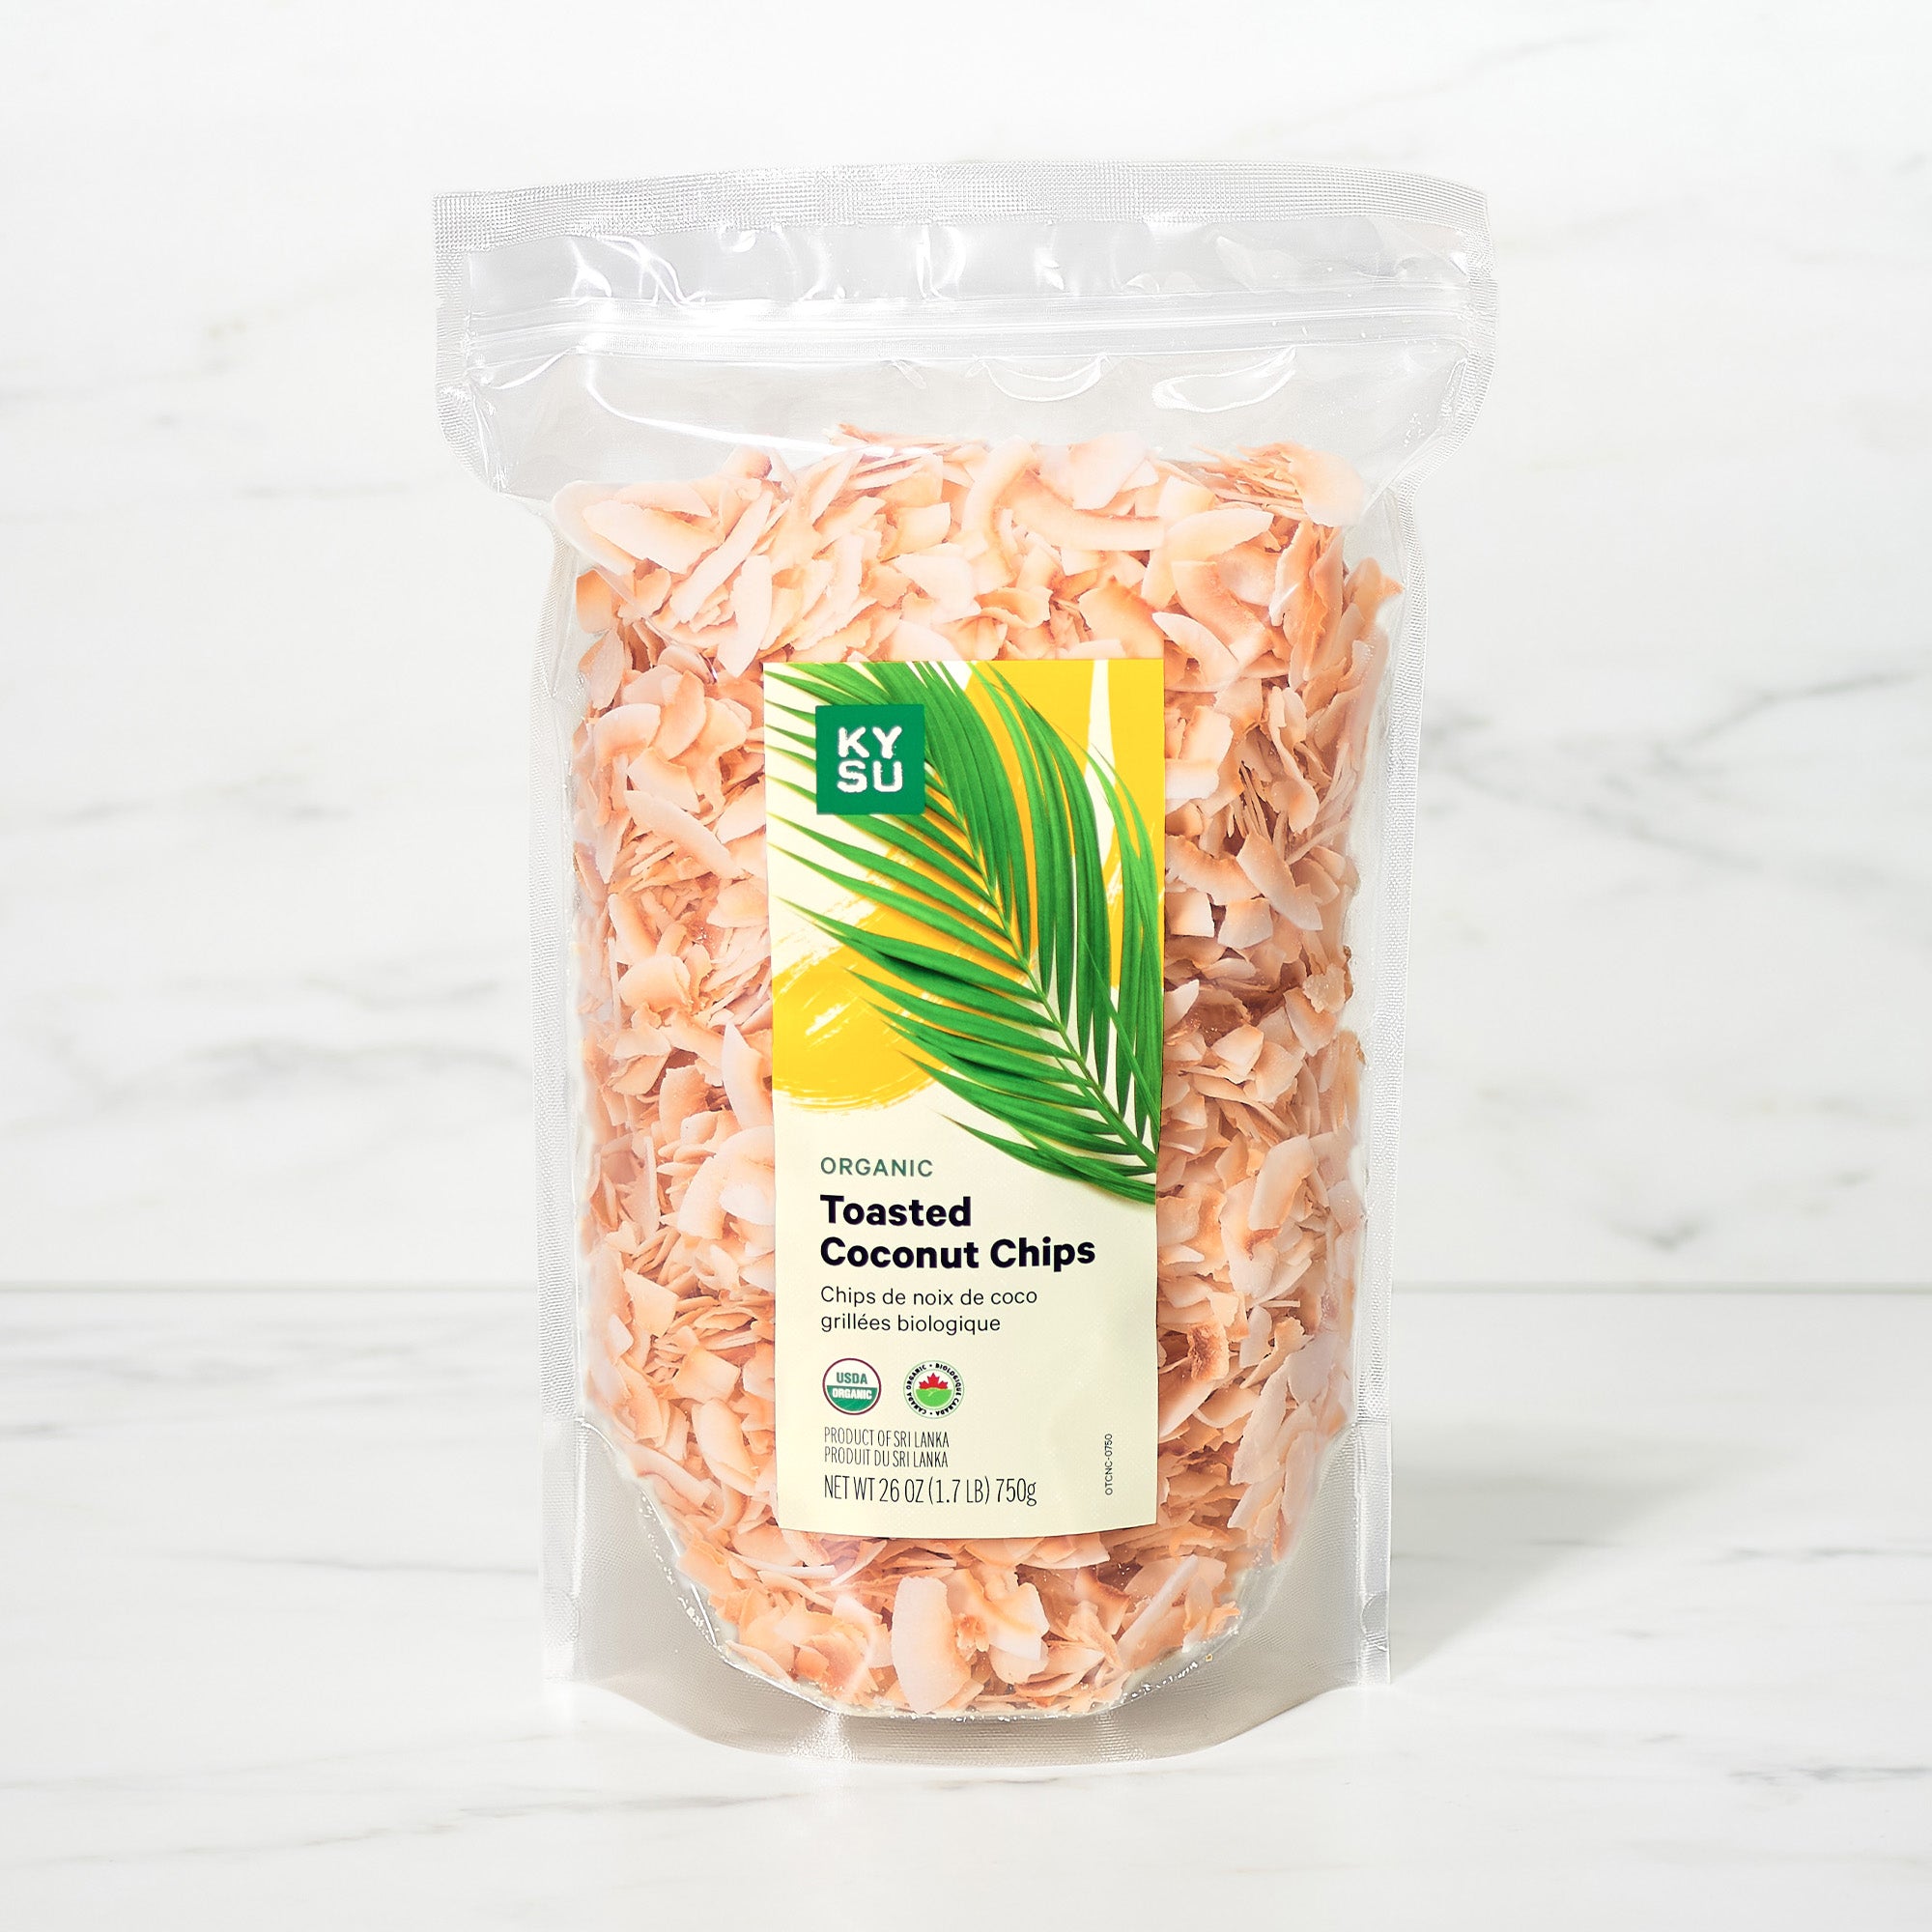 Organic toasted coconut chips, 1.7 lb